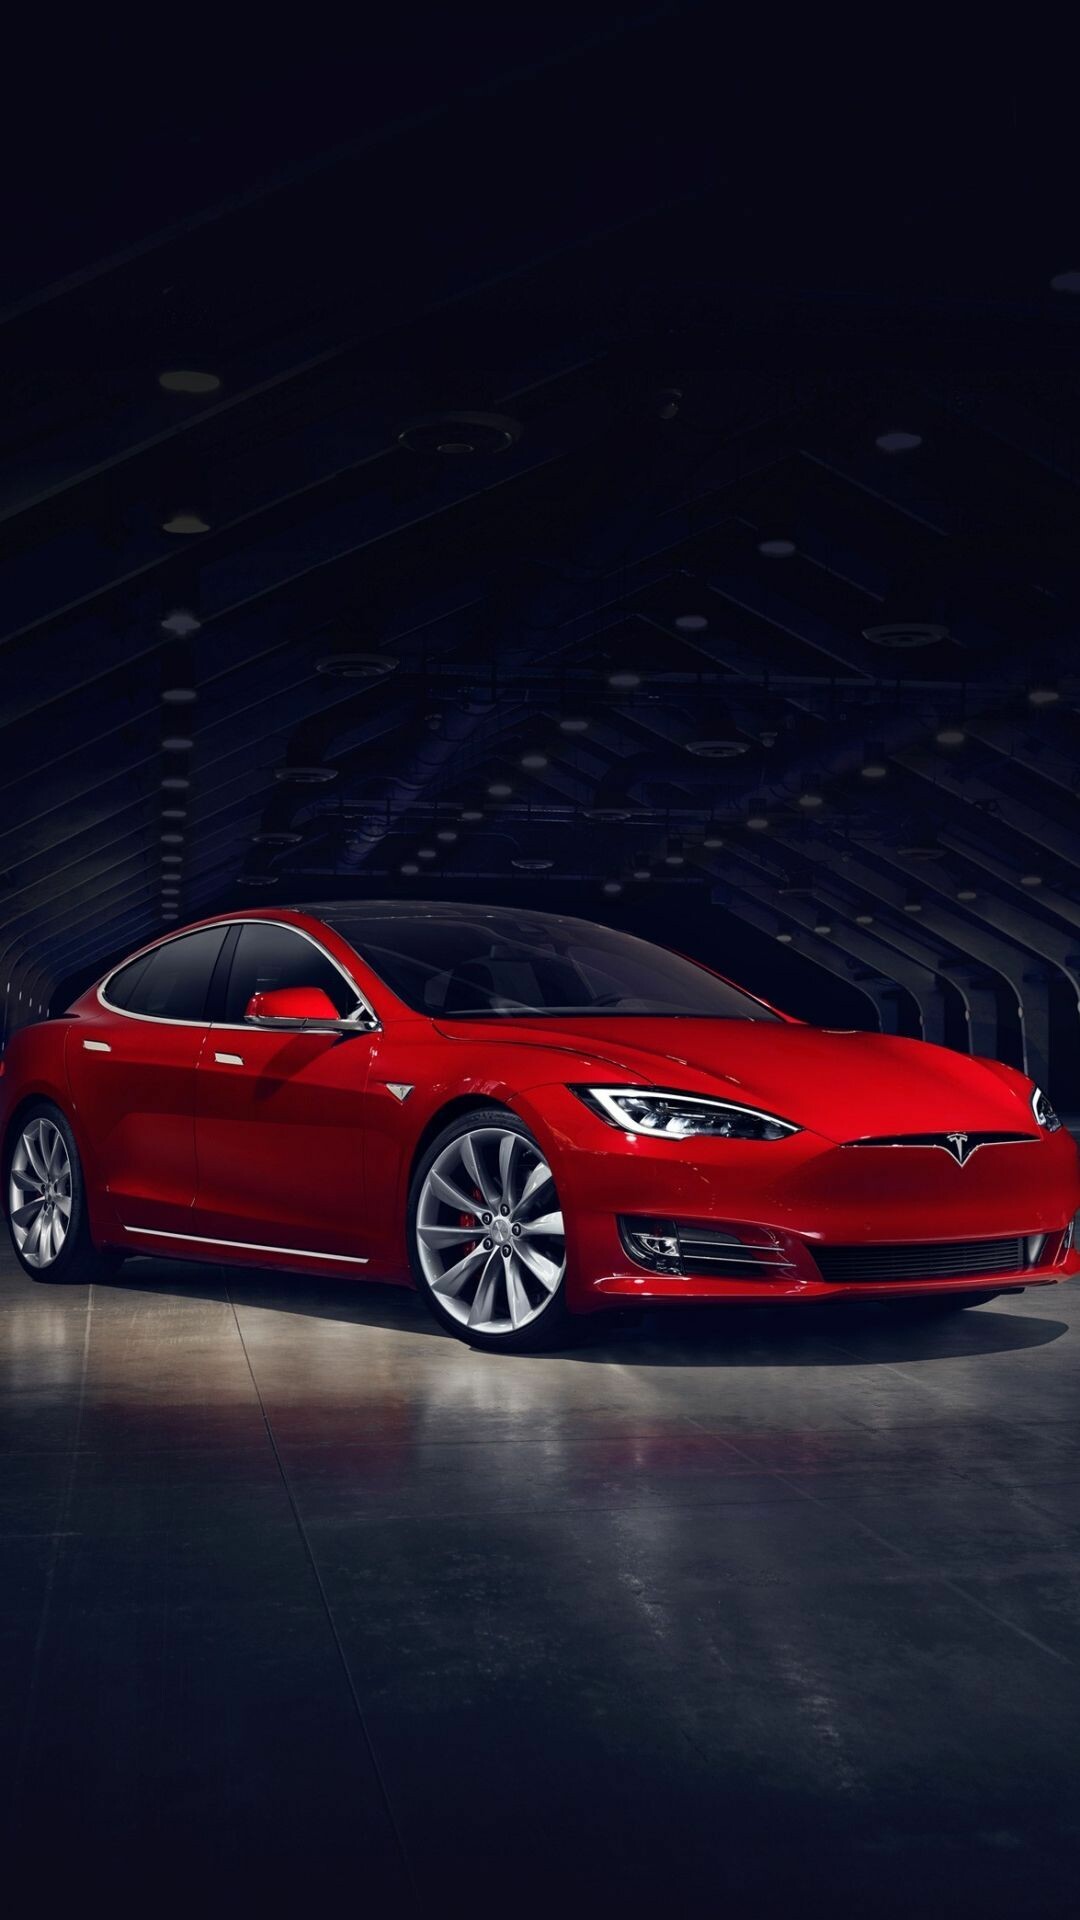 Tesla Model S: An all-electric executive saloon that combines amazing performance with zero tailpipe emissions. 1080x1920 Full HD Background.